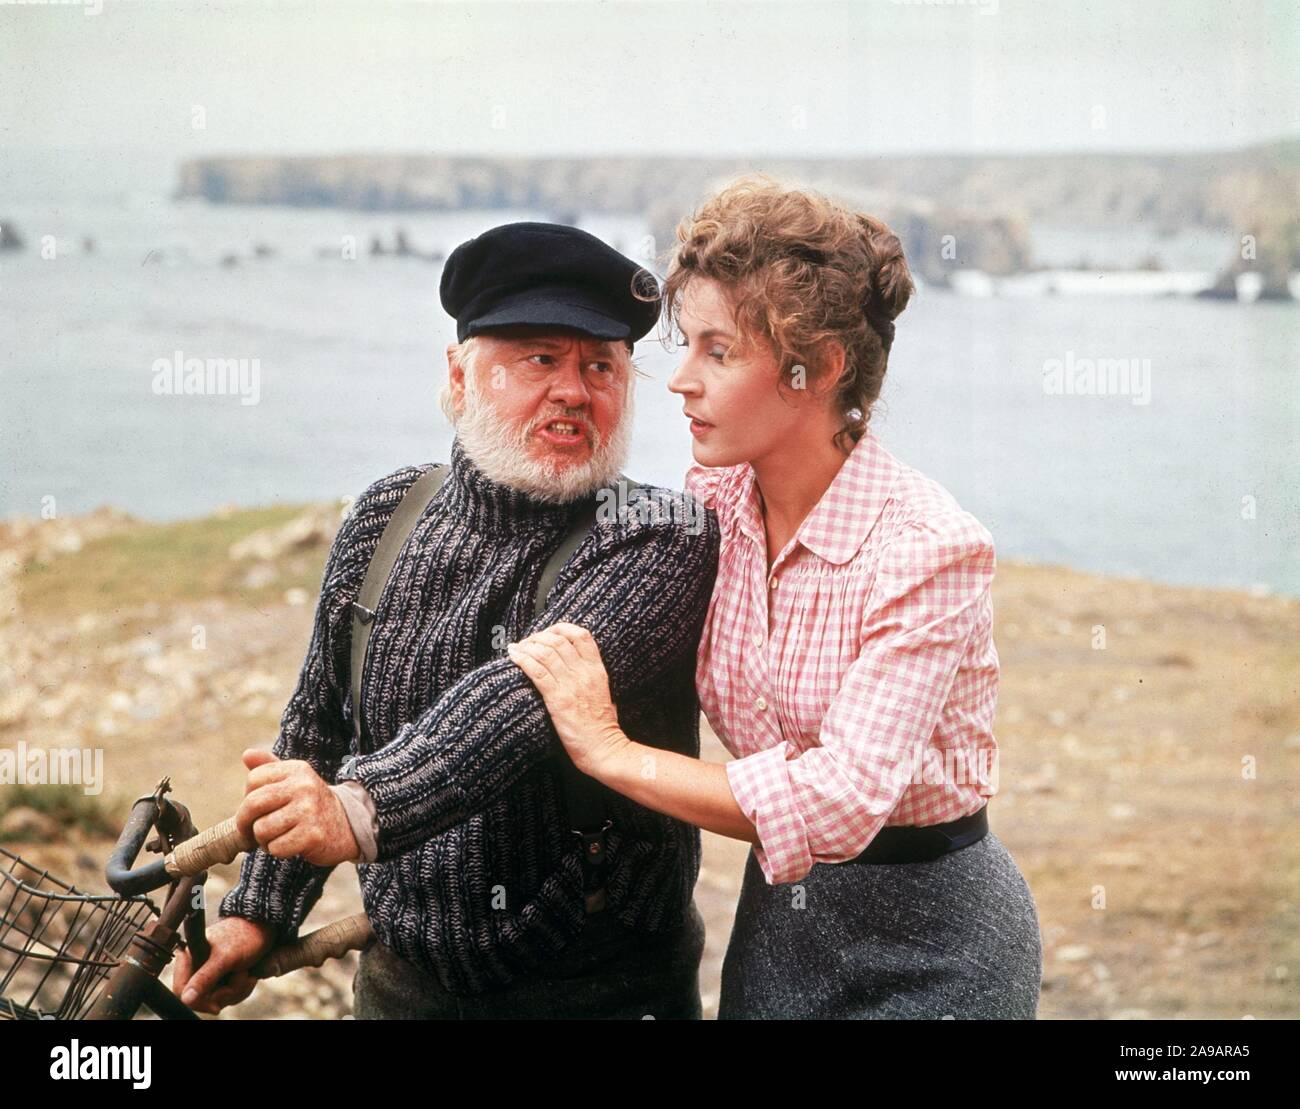 MICKEY ROONEY and HELEN REDDY in PETE'S DRAGON (1977), directed by DON CHAFFEY. Credit: WALT DISNEY PRODUCTIONS / Album Stock Photo